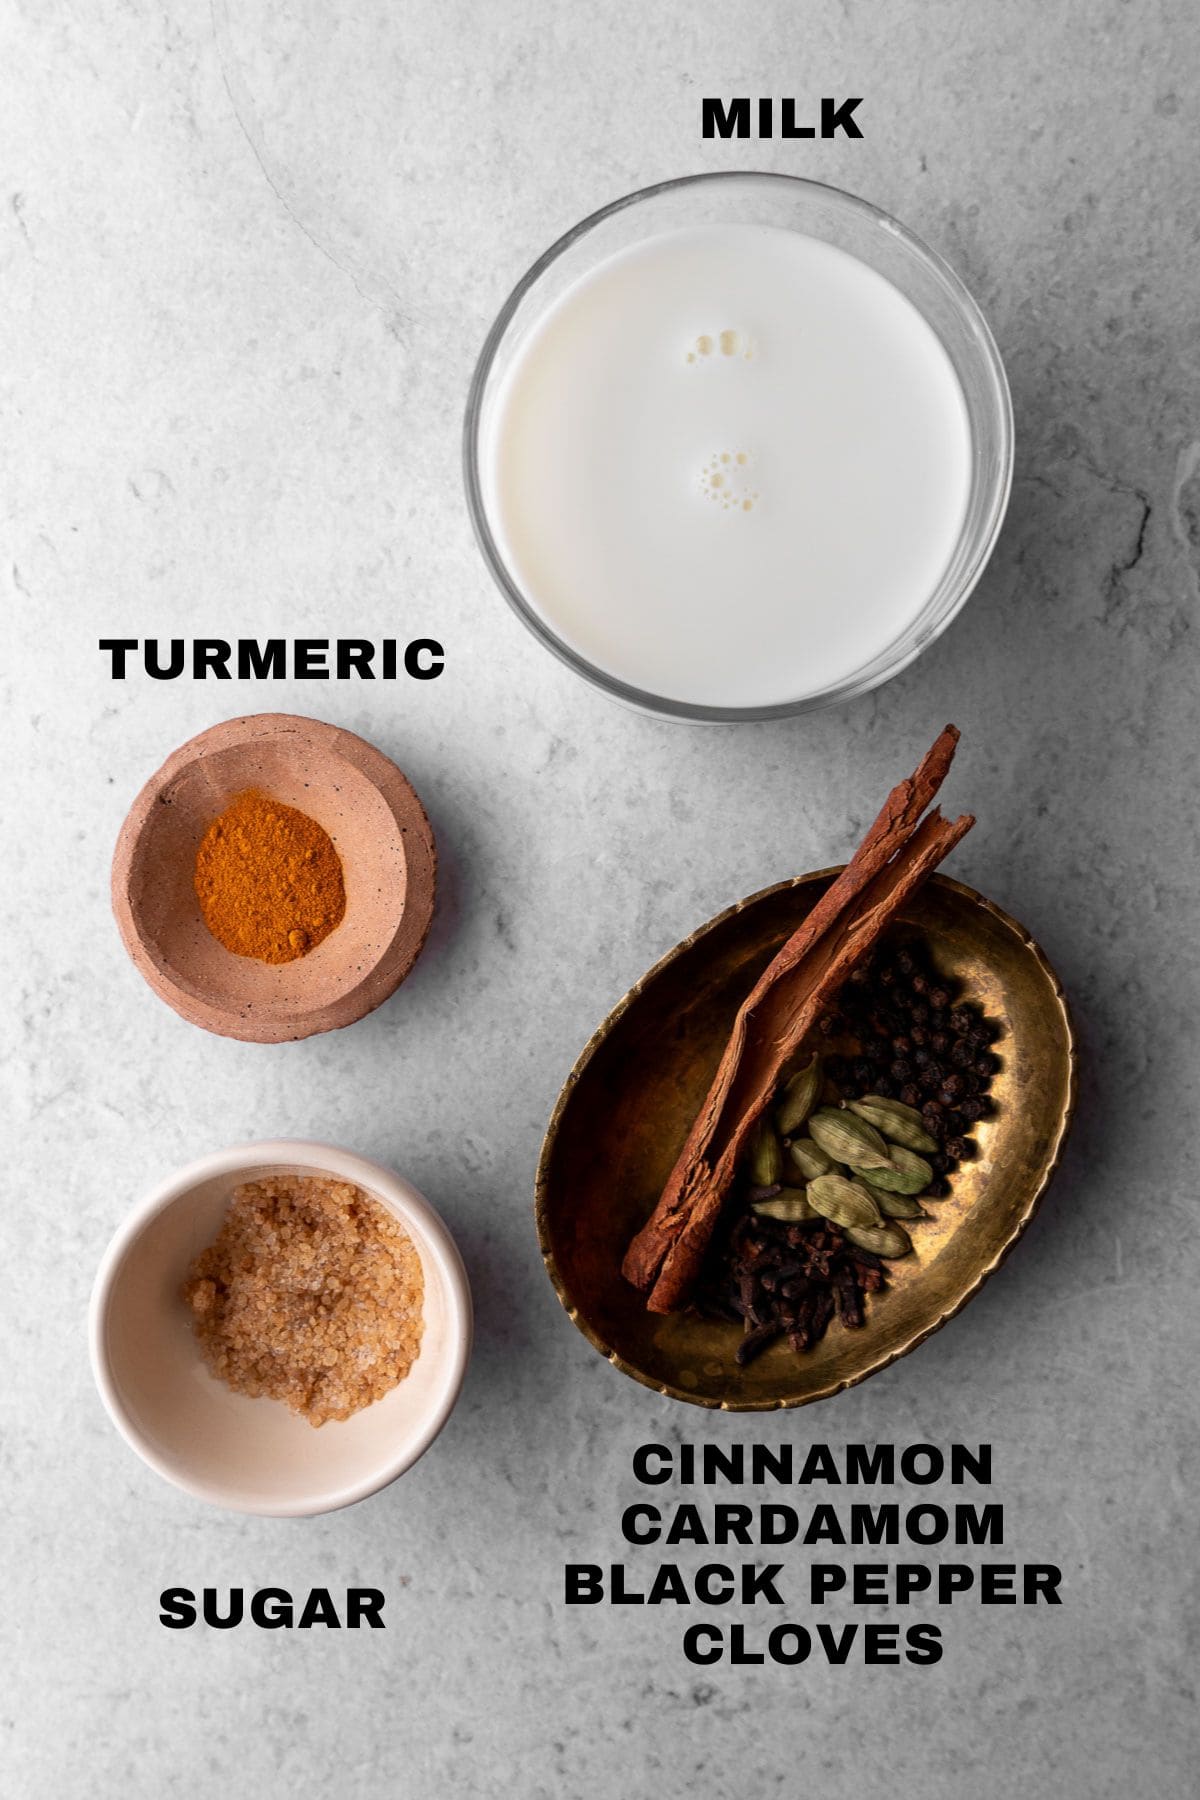 Milk, turmeric, sugar, and spices ingredients with labels.